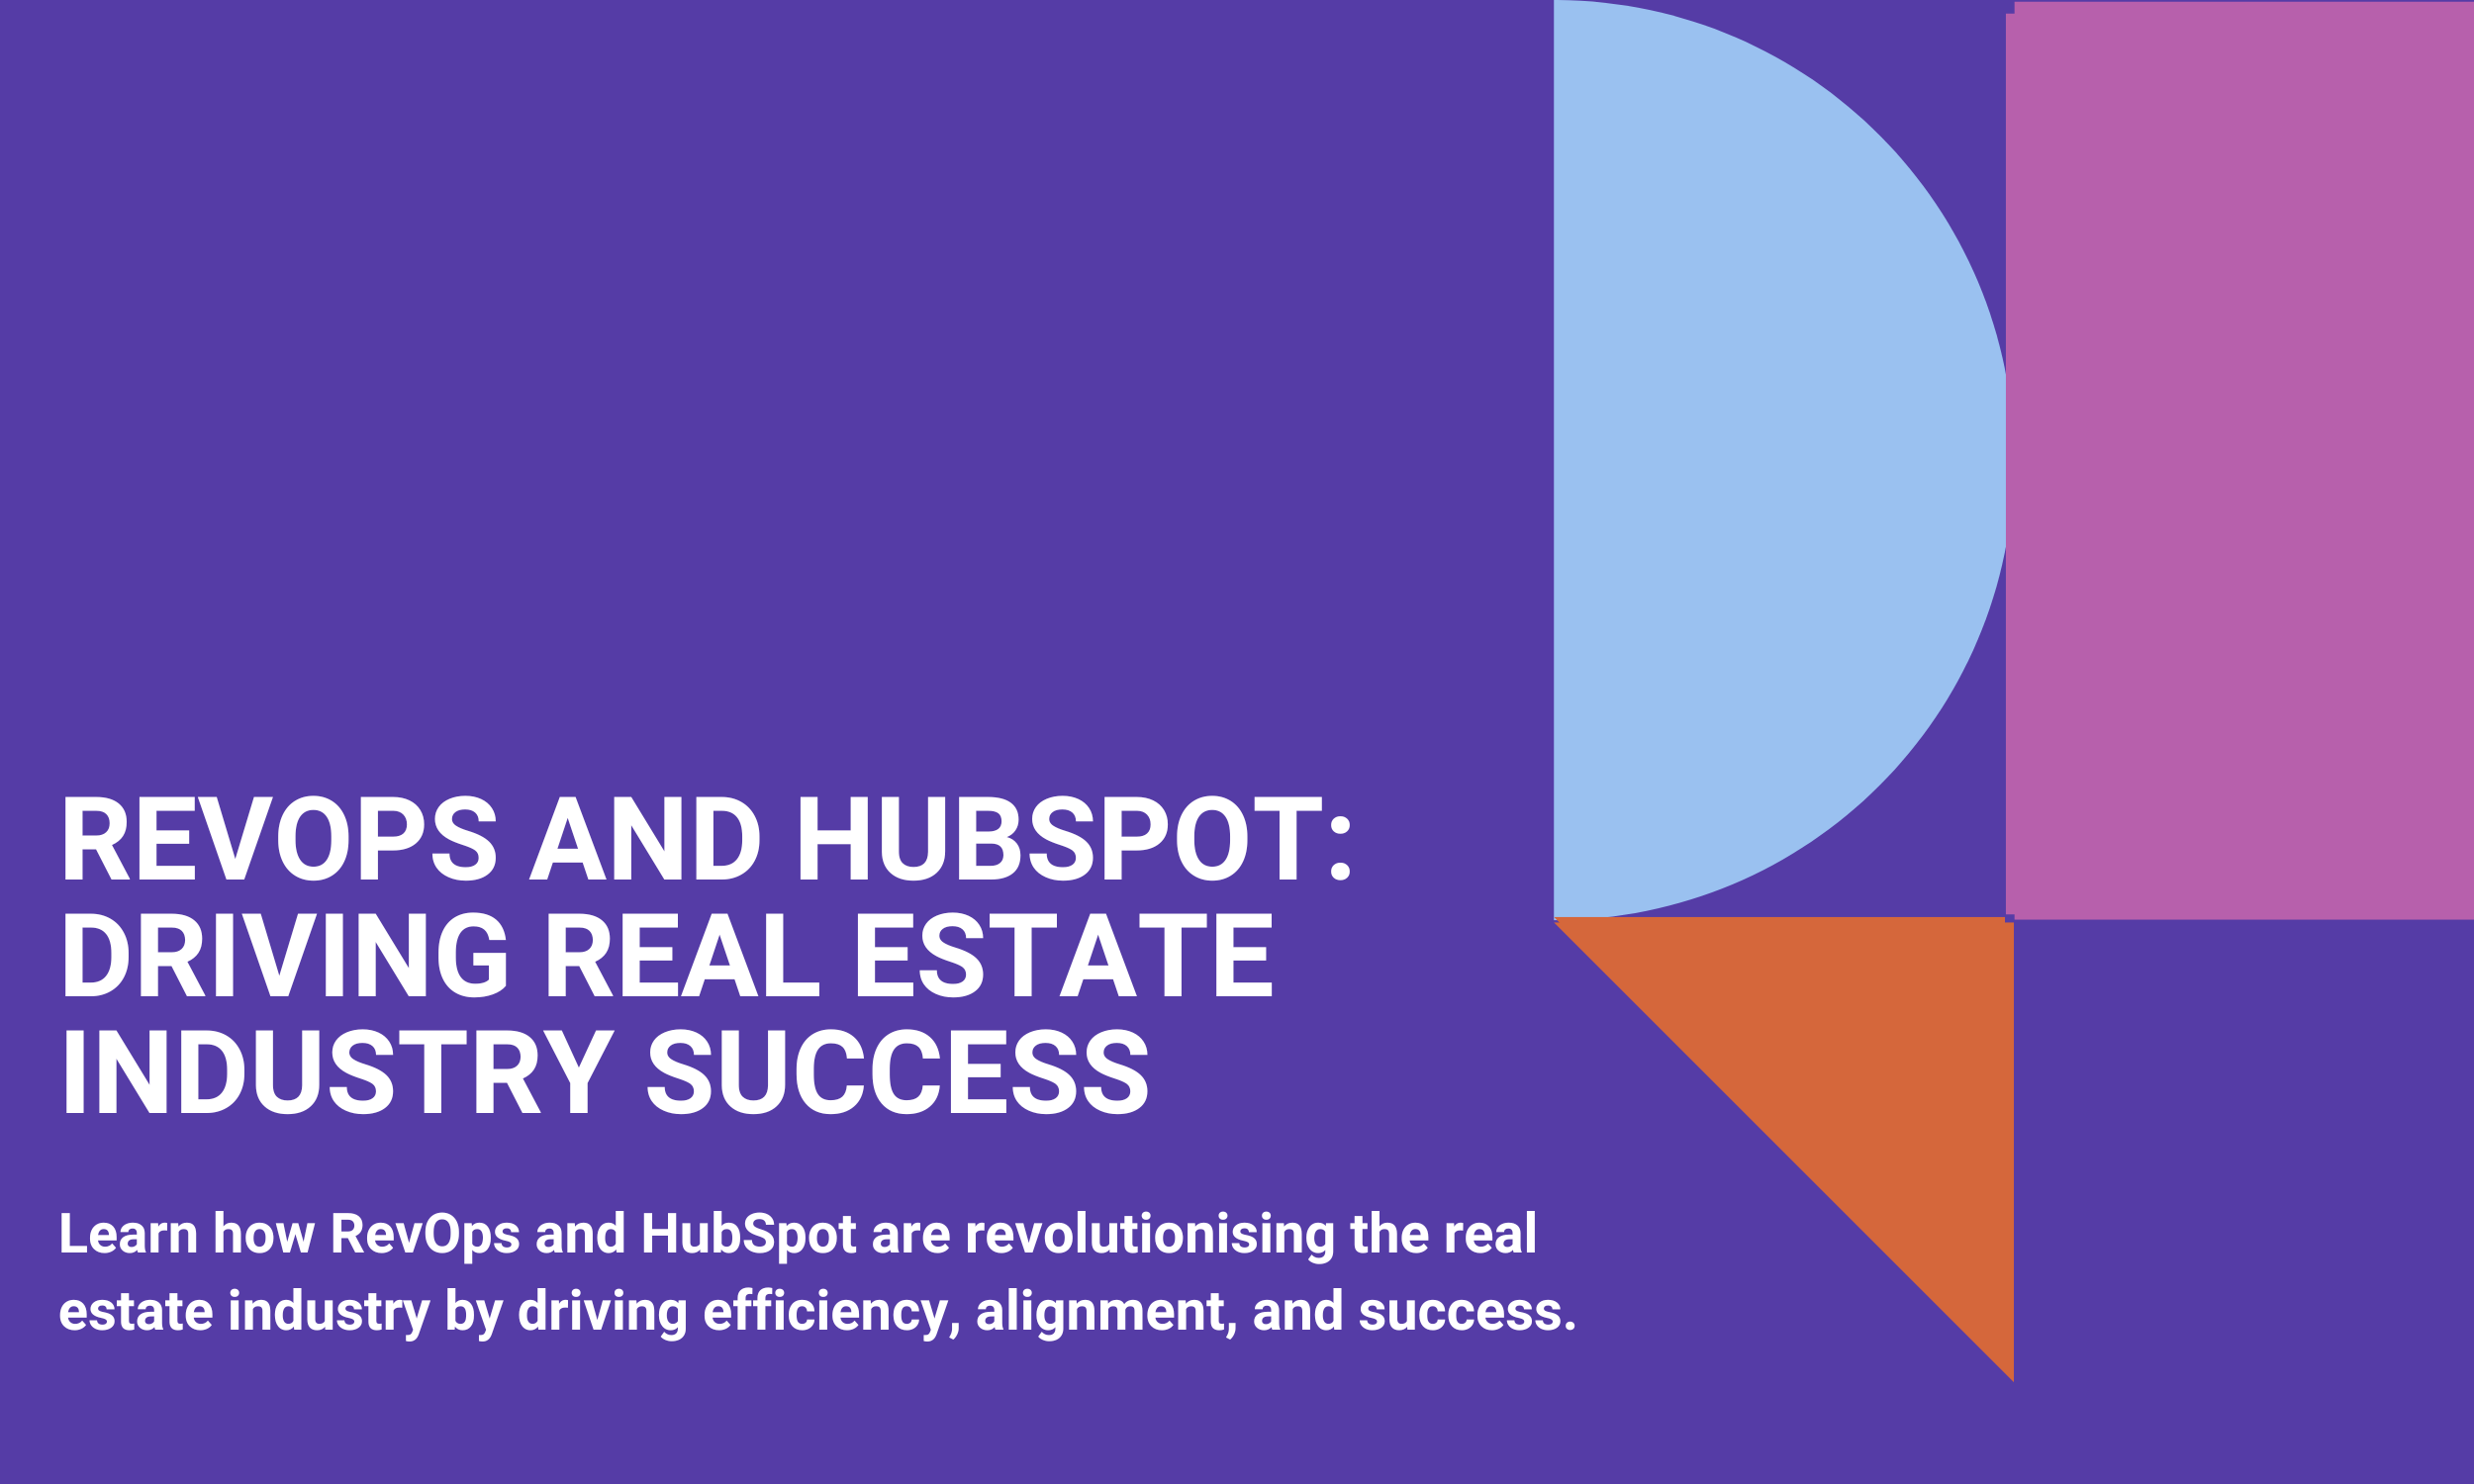 RevOps and HubSpot: Driving Real Estate Industry Success